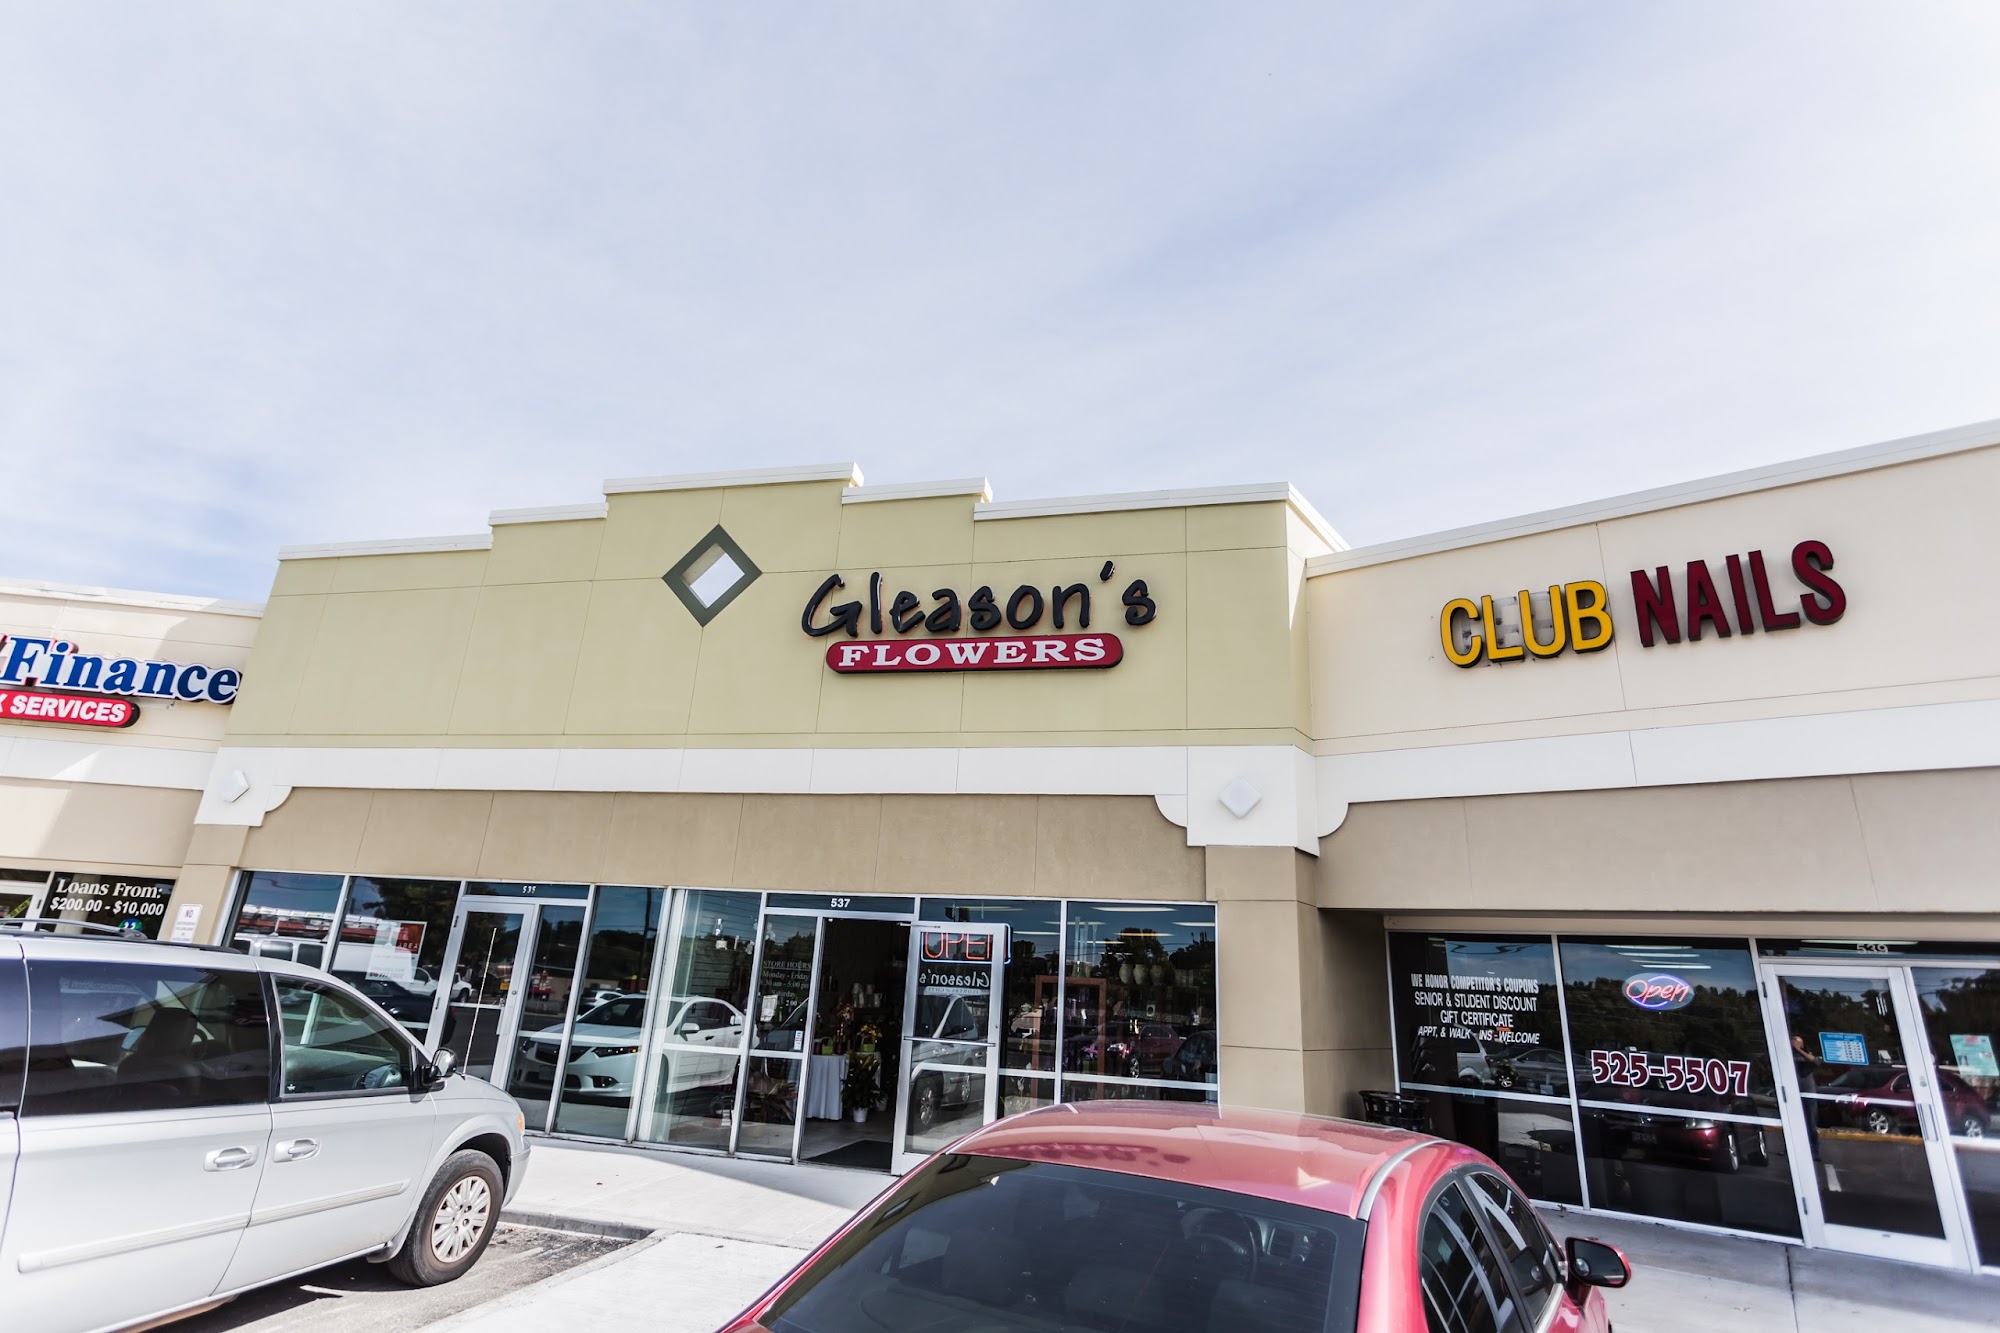 Gleason's Flowers and Gifts